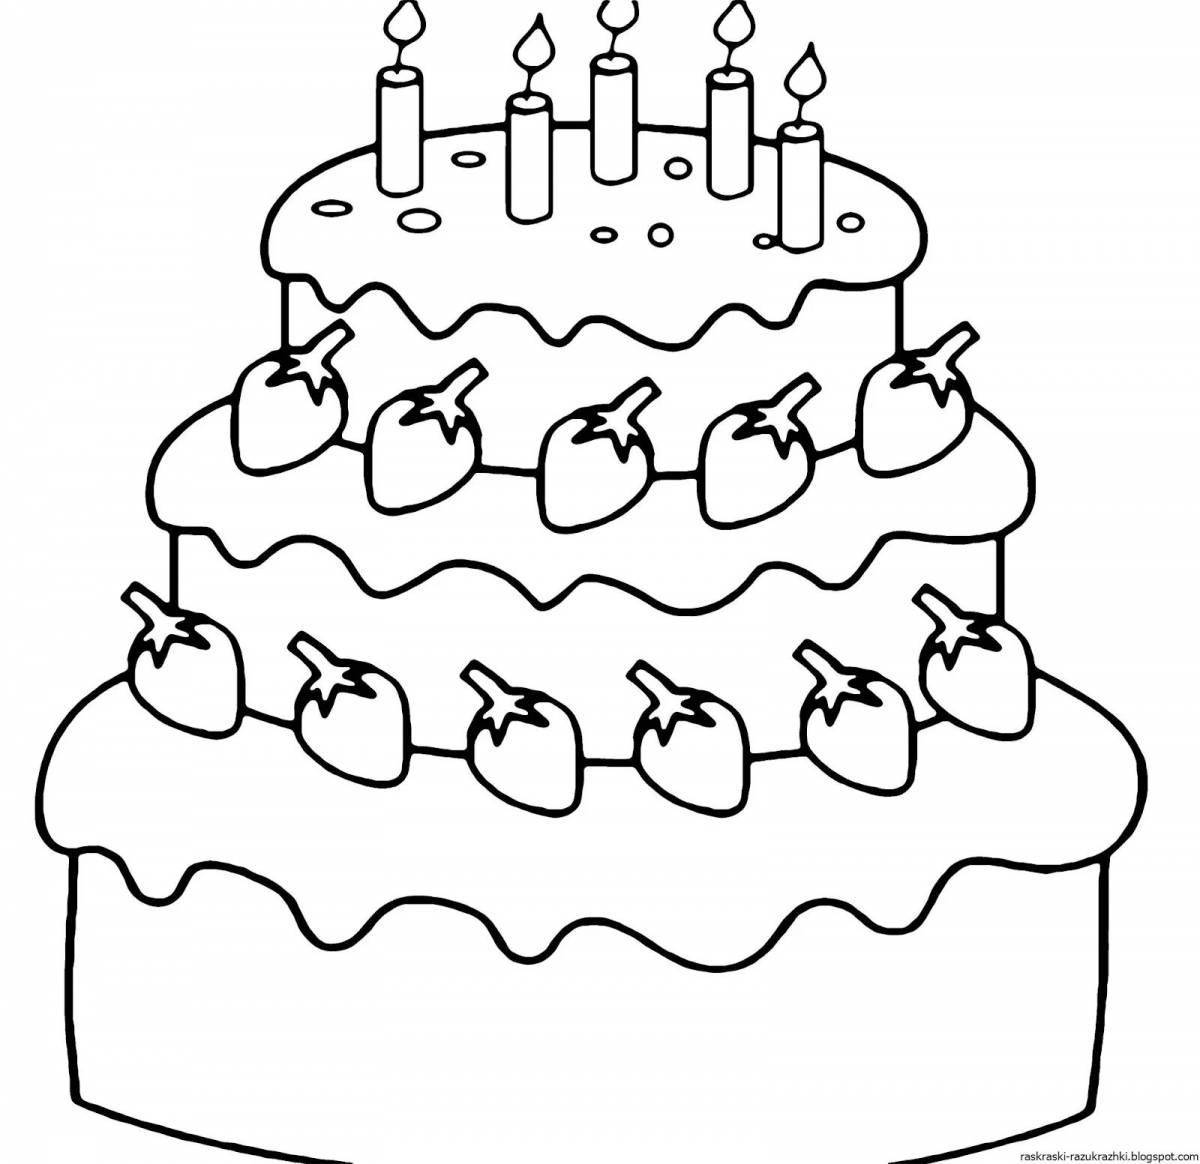 Colorful cake coloring page for 3-4 year olds